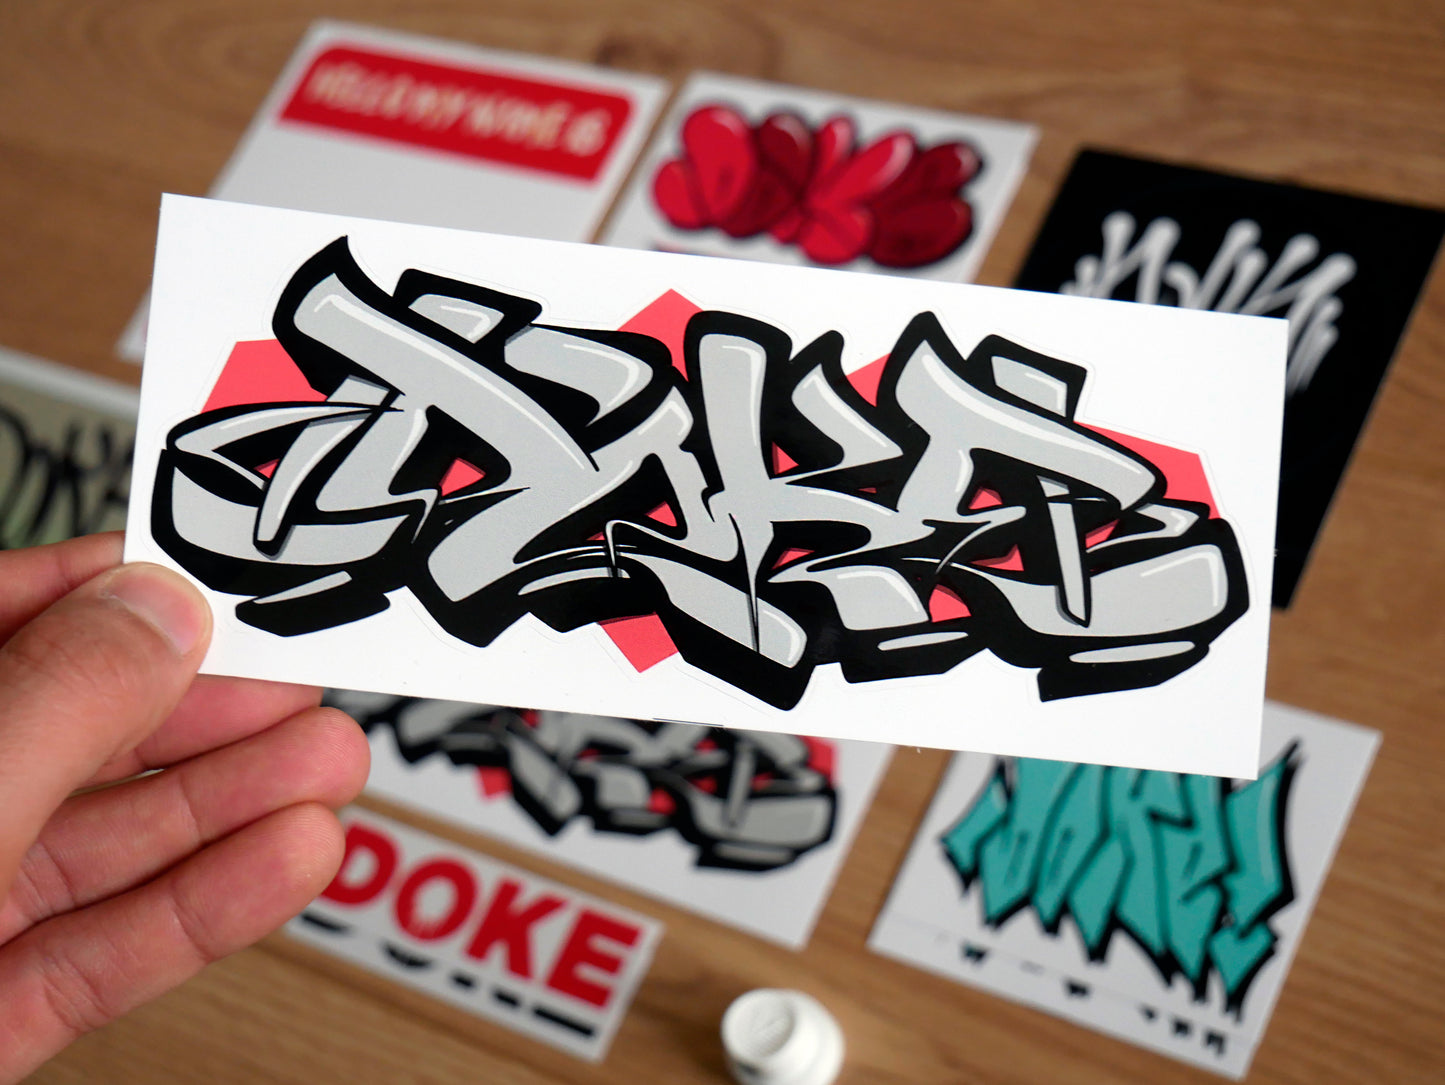 Doke Stickers Pack No.2